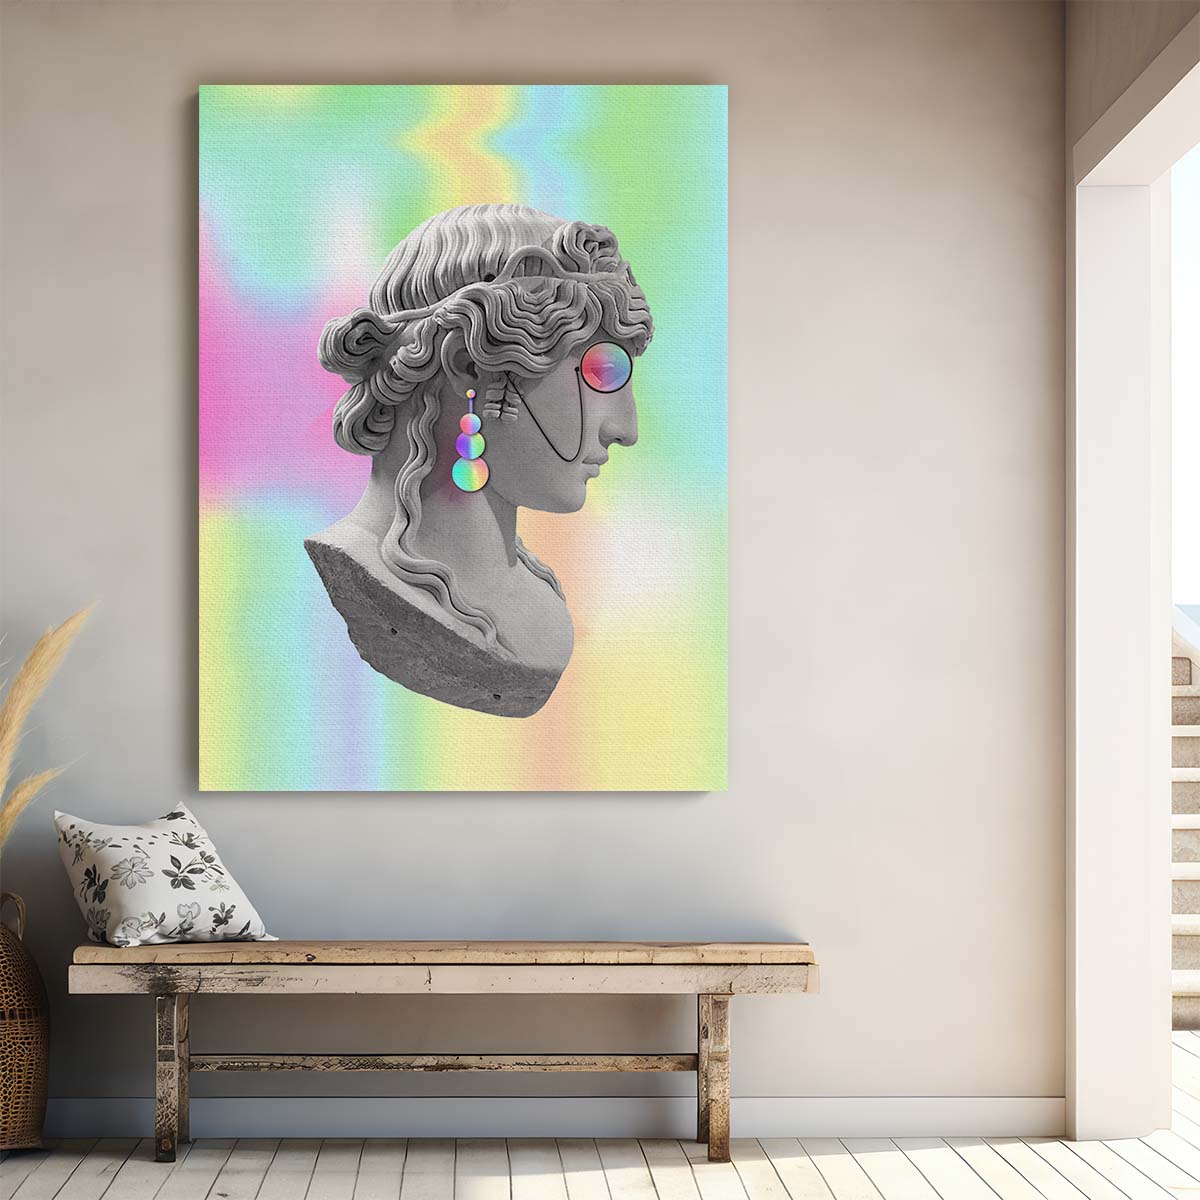 Holographic 3D Greek Statue Illustration Art by Fadil Roze by Luxuriance Designs, made in USA